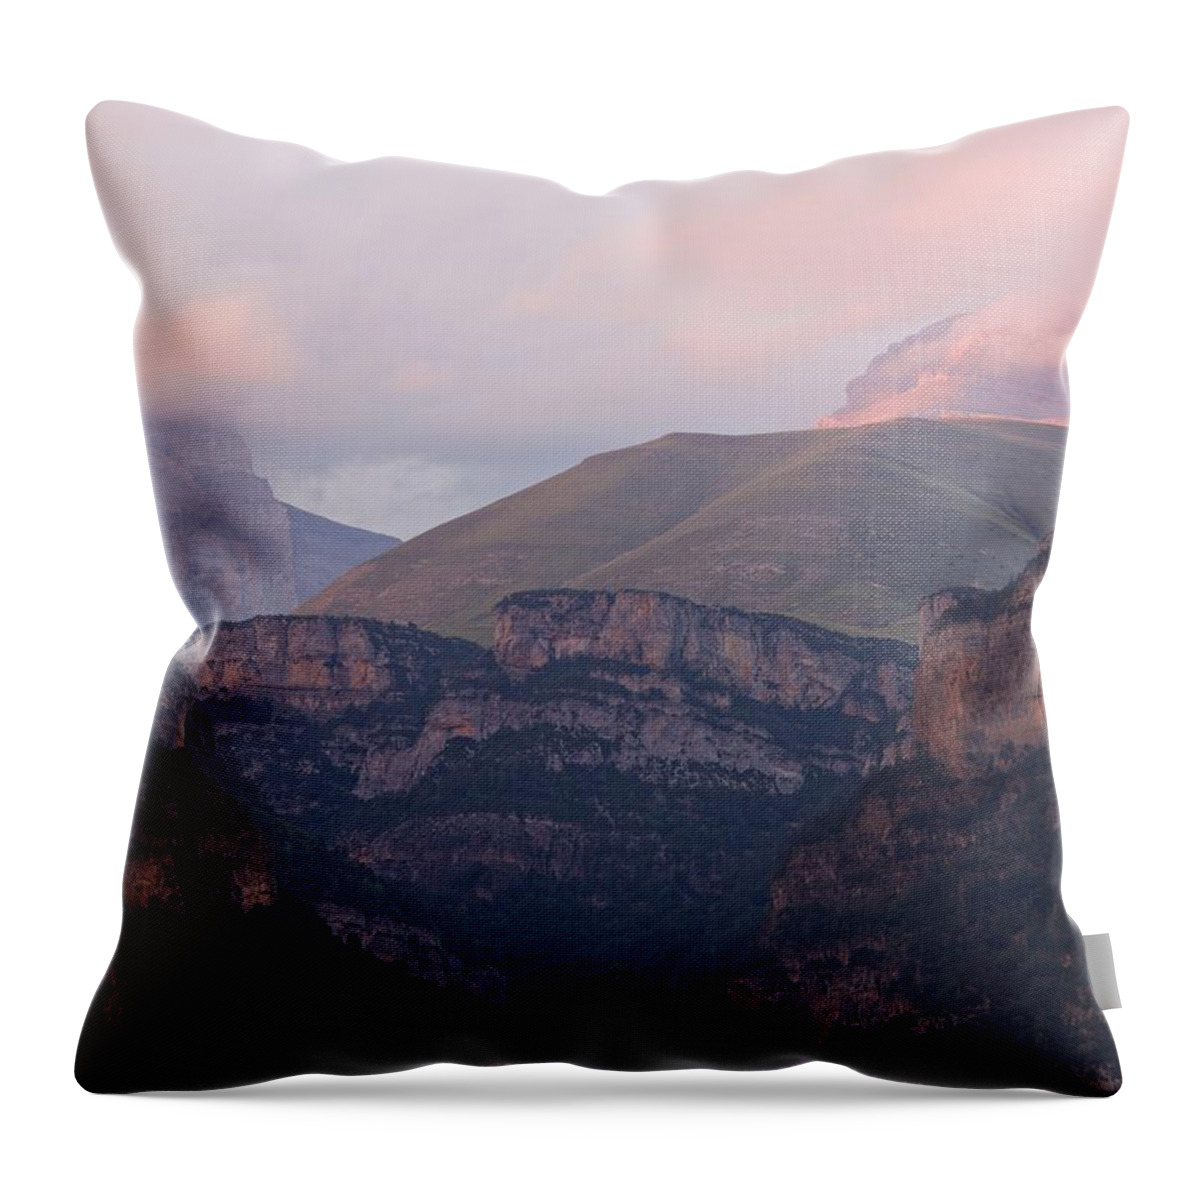 Anisclo Canyon Throw Pillow featuring the photograph Anisclo Canyon Sunset by Stephen Taylor